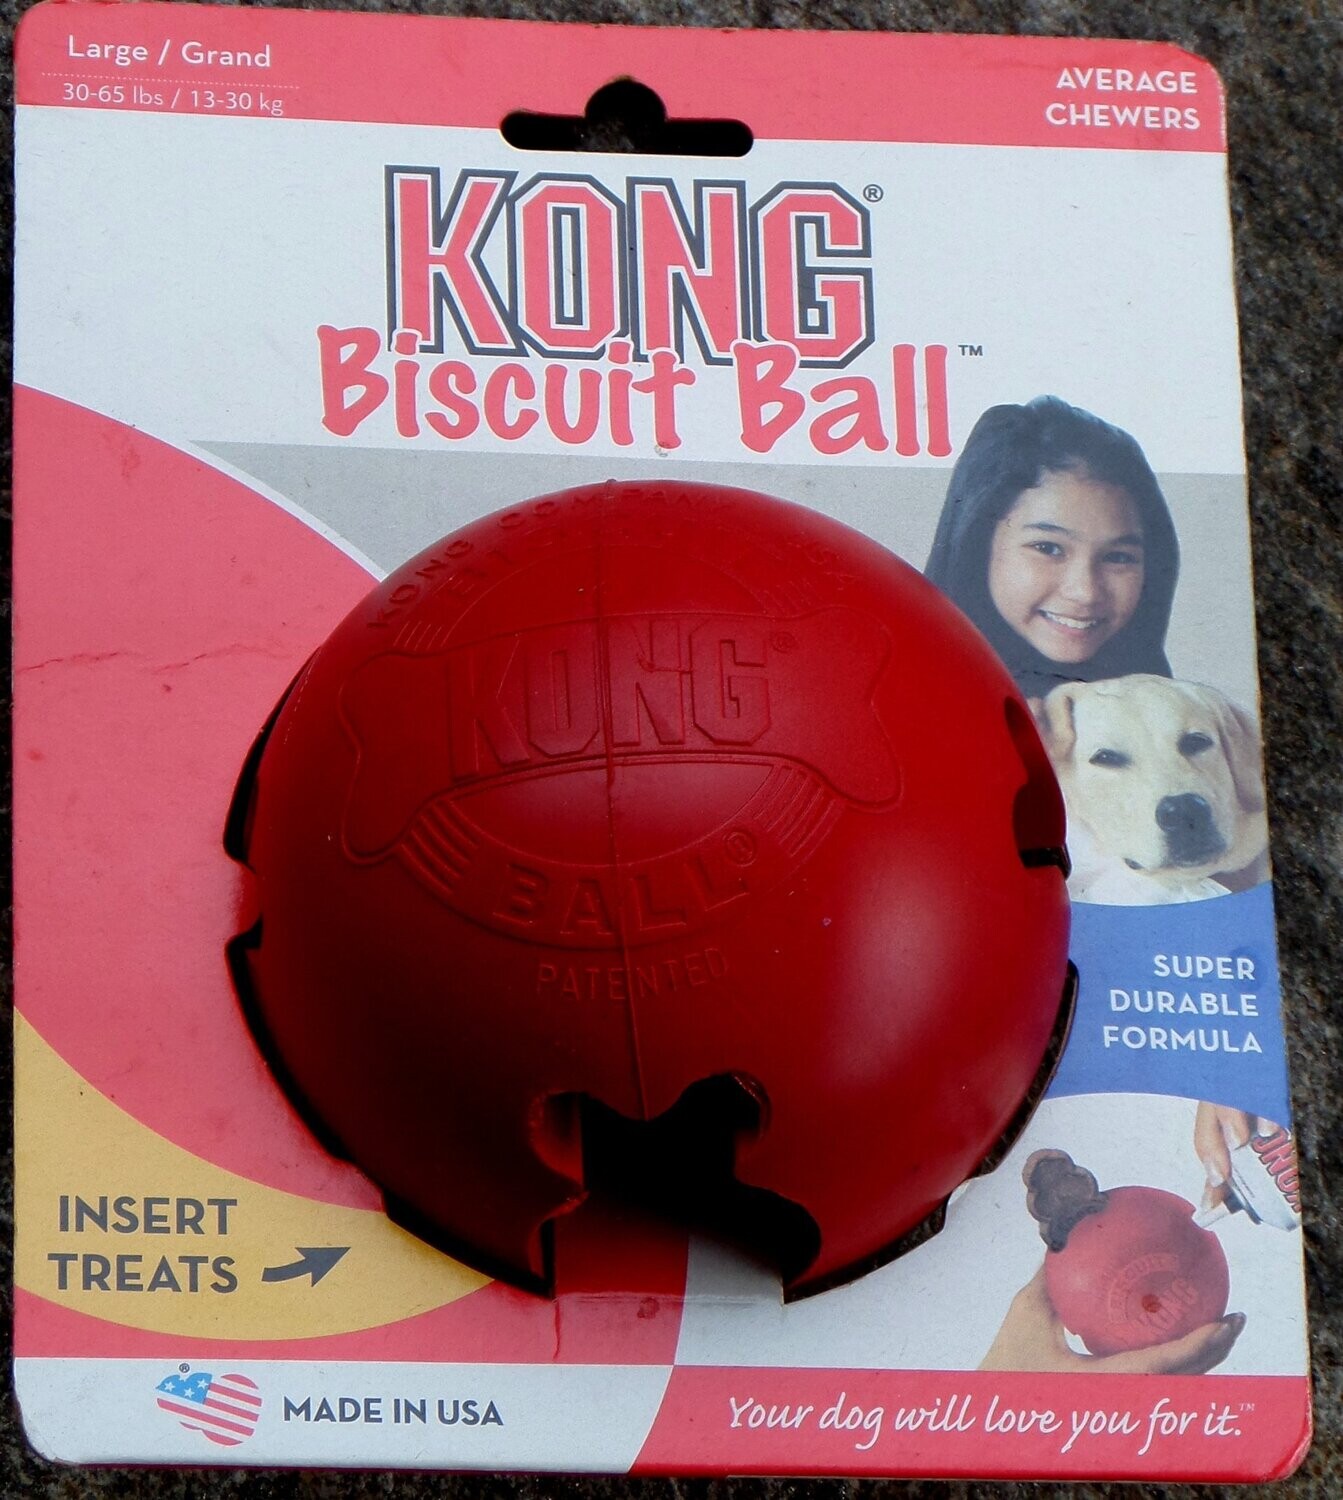 KONG Biscuit-Ball, large